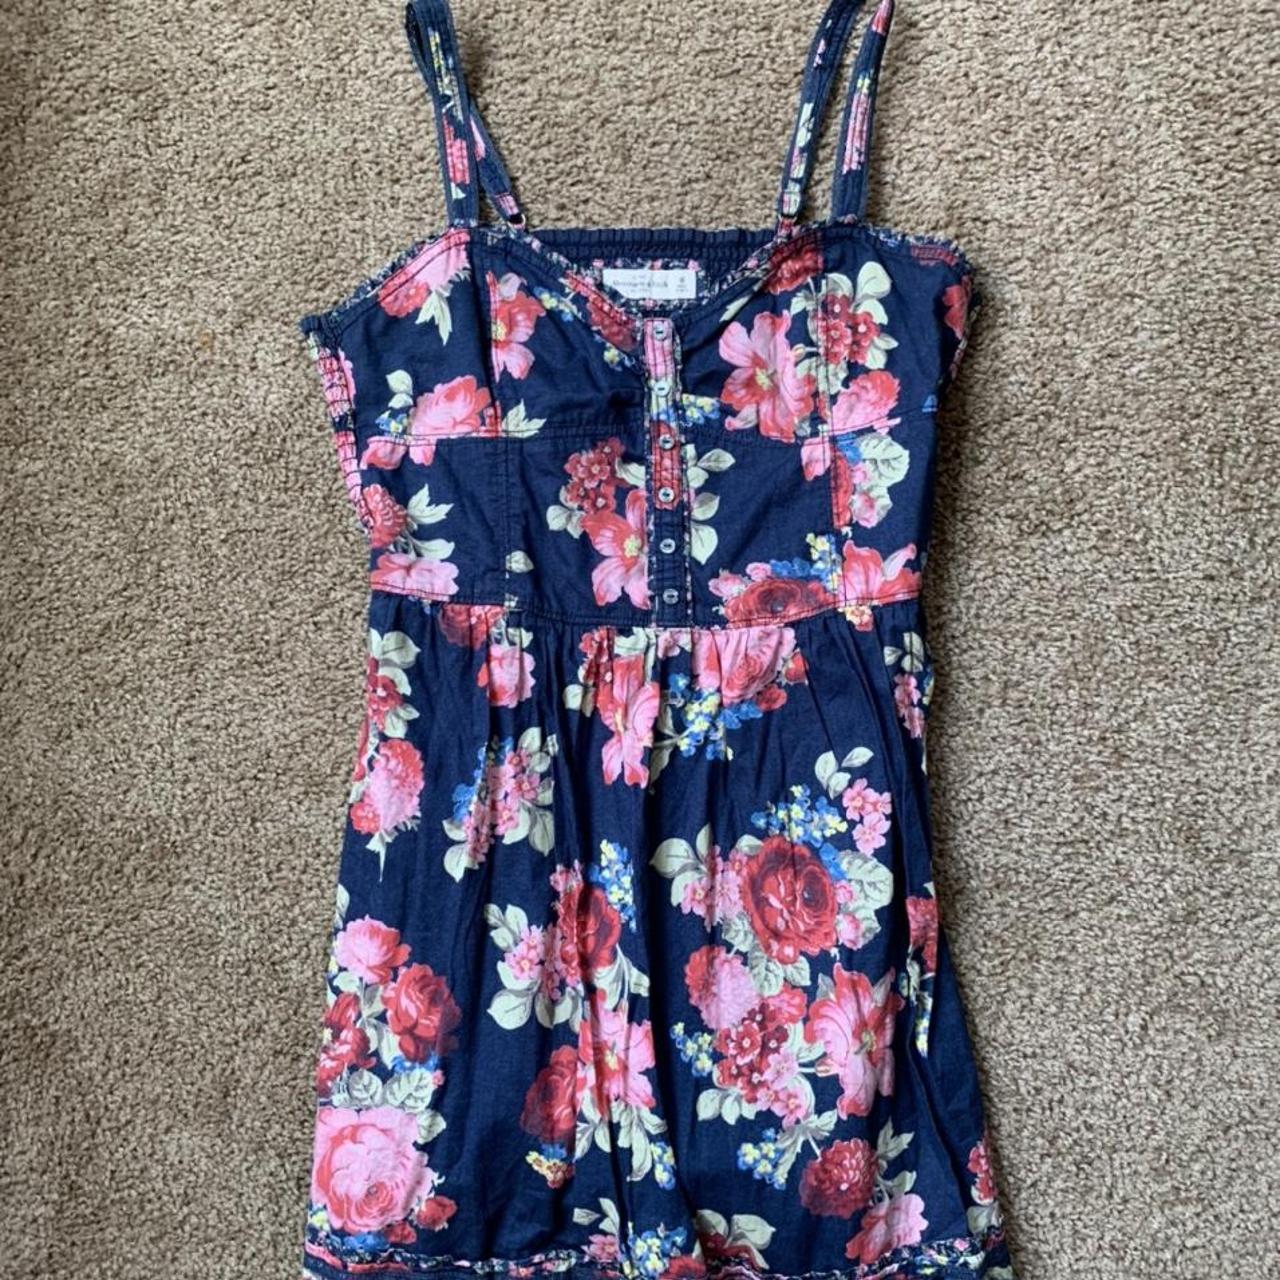 Abercrombie & Fitch Women's Navy and Pink Dress | Depop